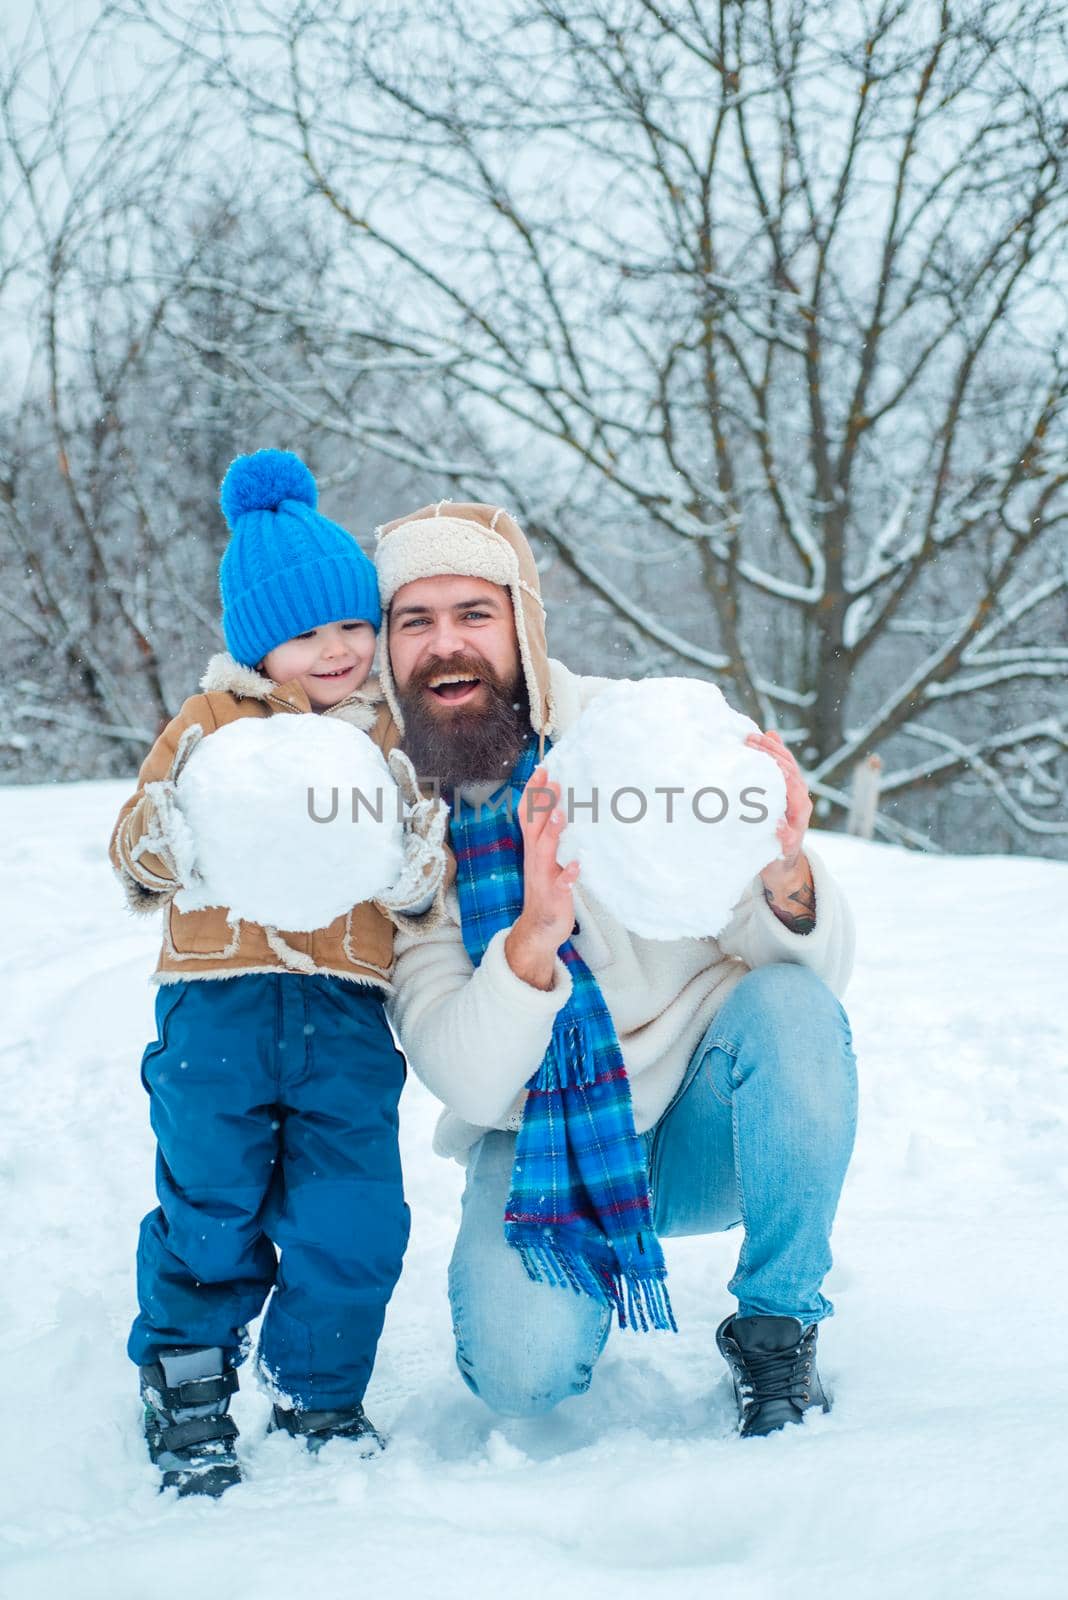 Best winter game for happy family. Happy father and son making snowman in the snow. Handmade funny snow man. Happy family plaing with a snowman on a snowy winter walk. by Tverdokhlib